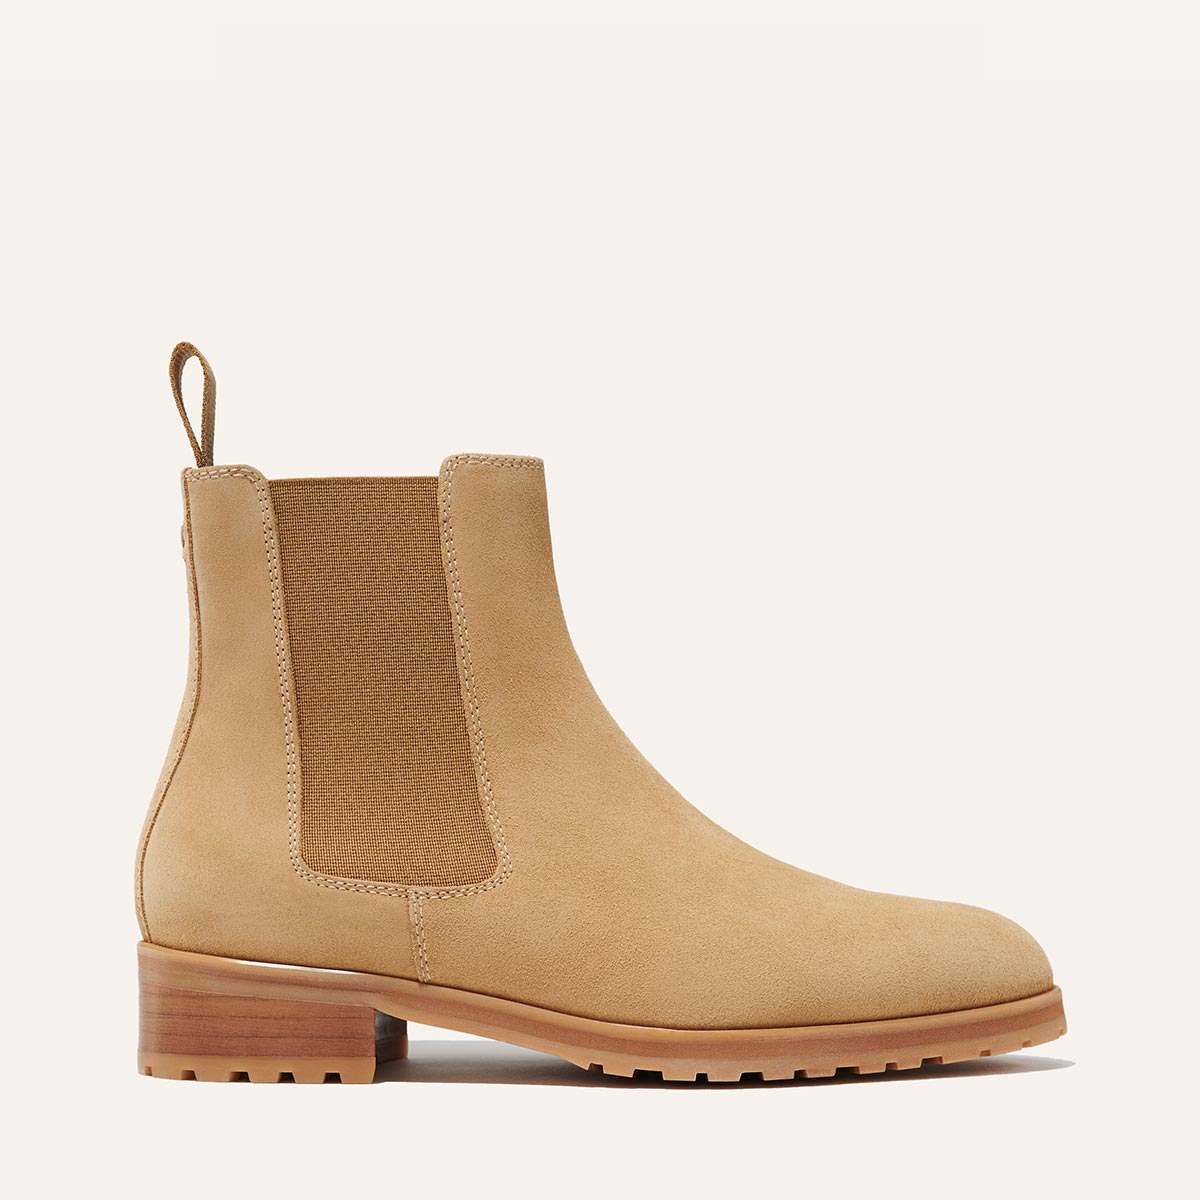 Margaux's classic Chelsea Boot in weatherproof, tan German suede with a rubber lug sole and tapered toe